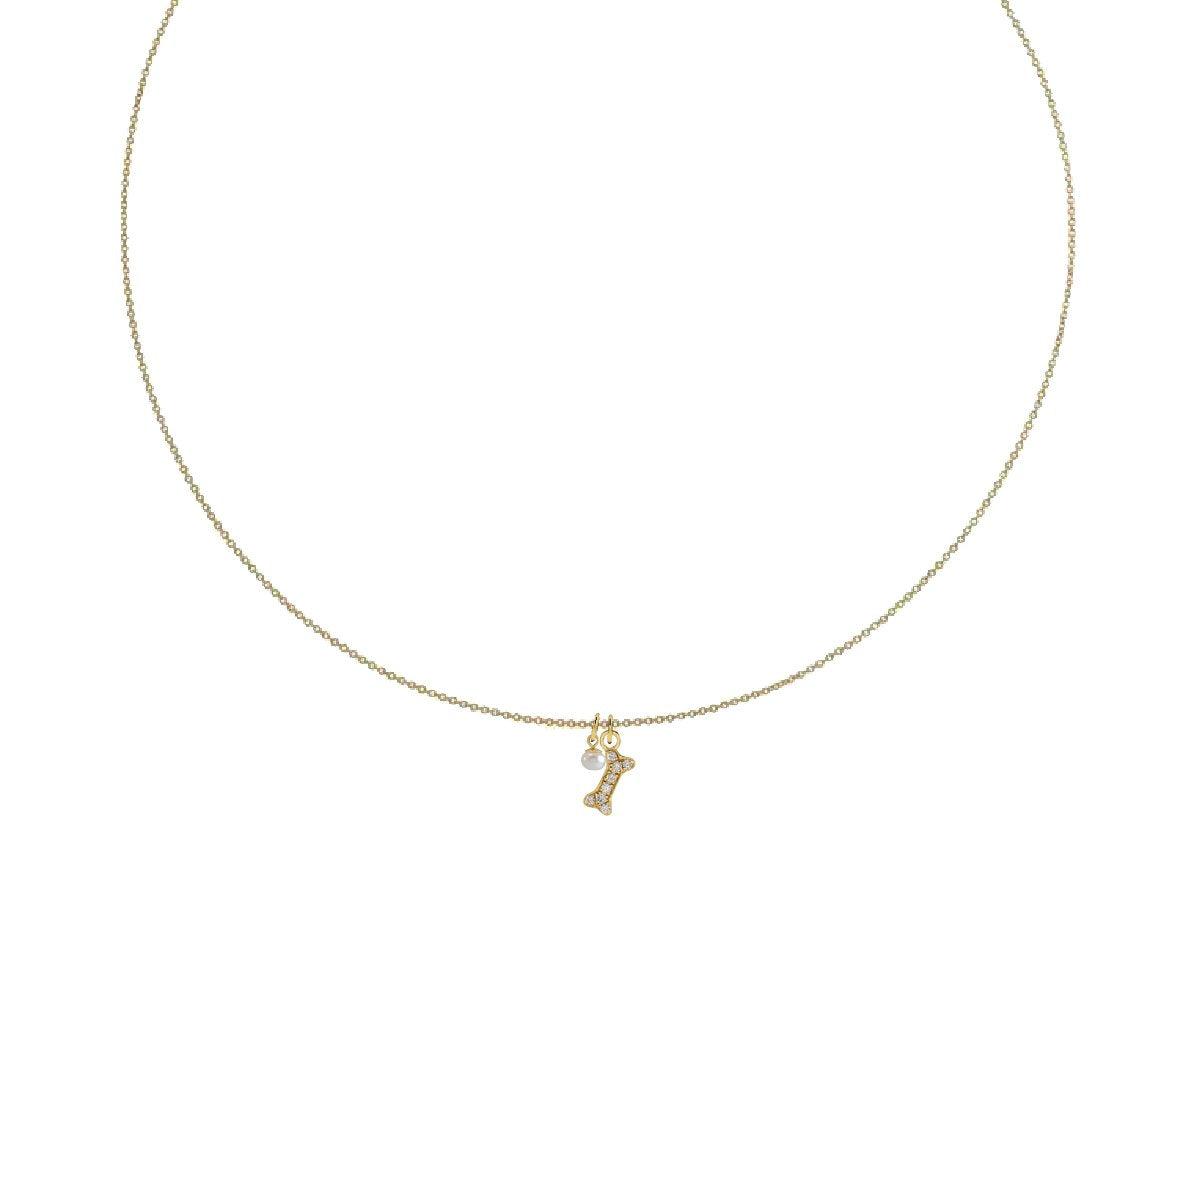 Charm Collection - For the Dog Lover Robyn Canady Charm + 14K Gold Filled Chain Add a Pearl 